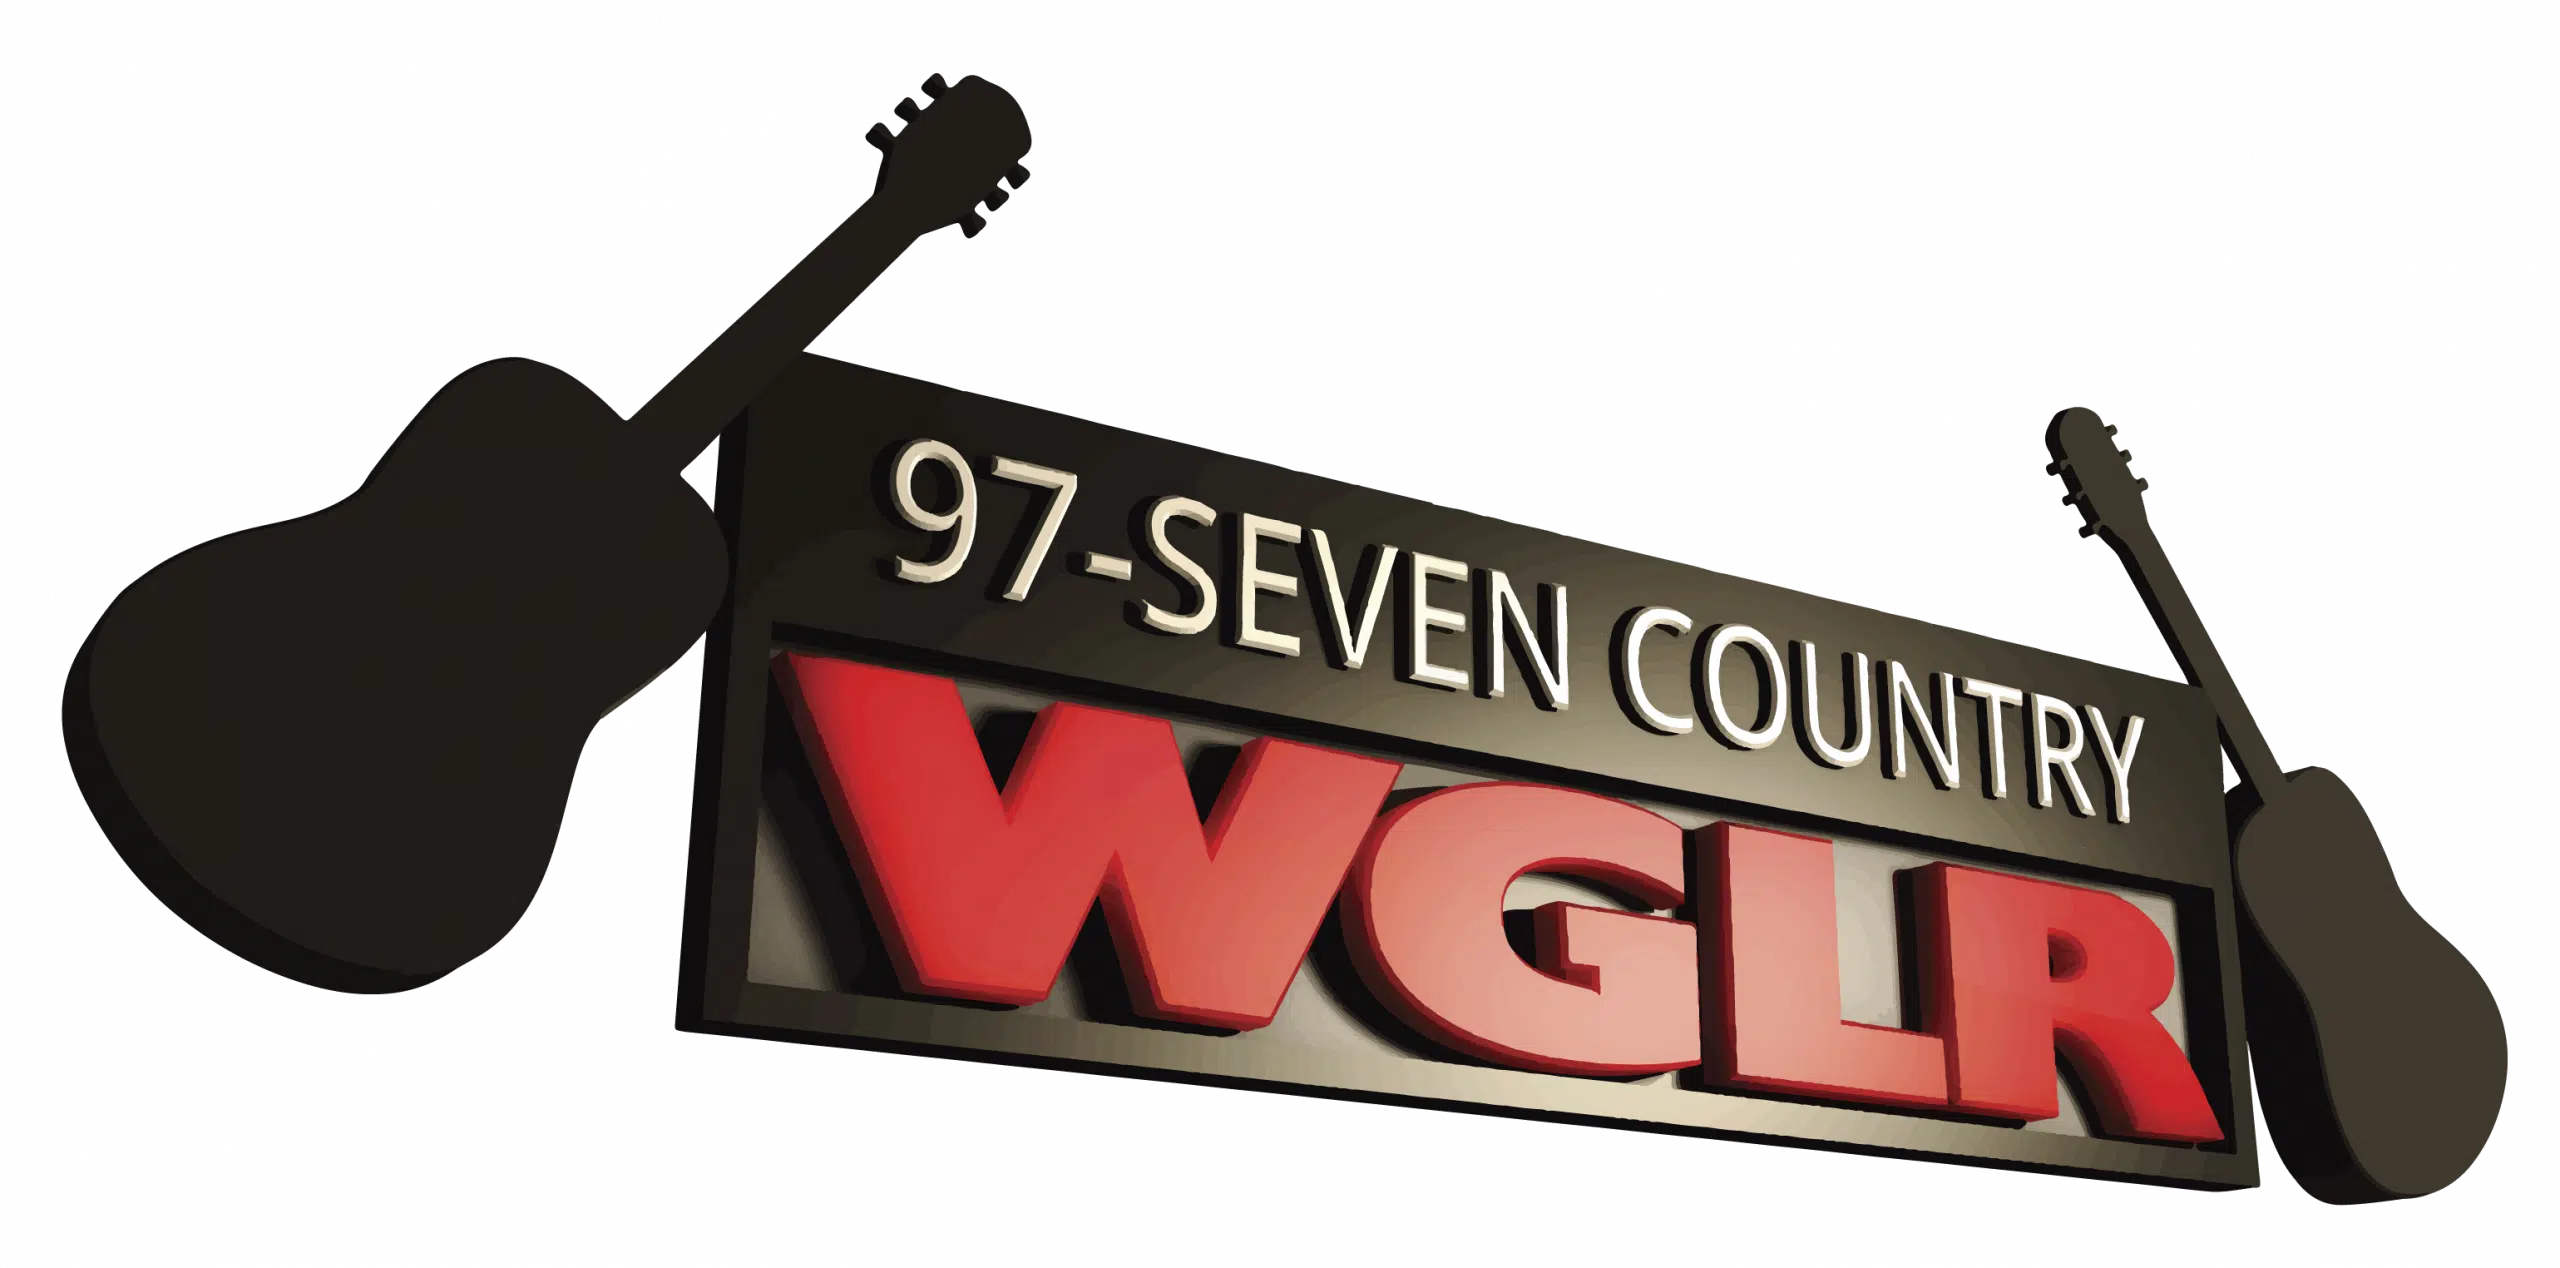 97 Seven Country WGLR - The Tri-States Best Variety of Country - Lancaster, Dubuque, Galena, Platteville